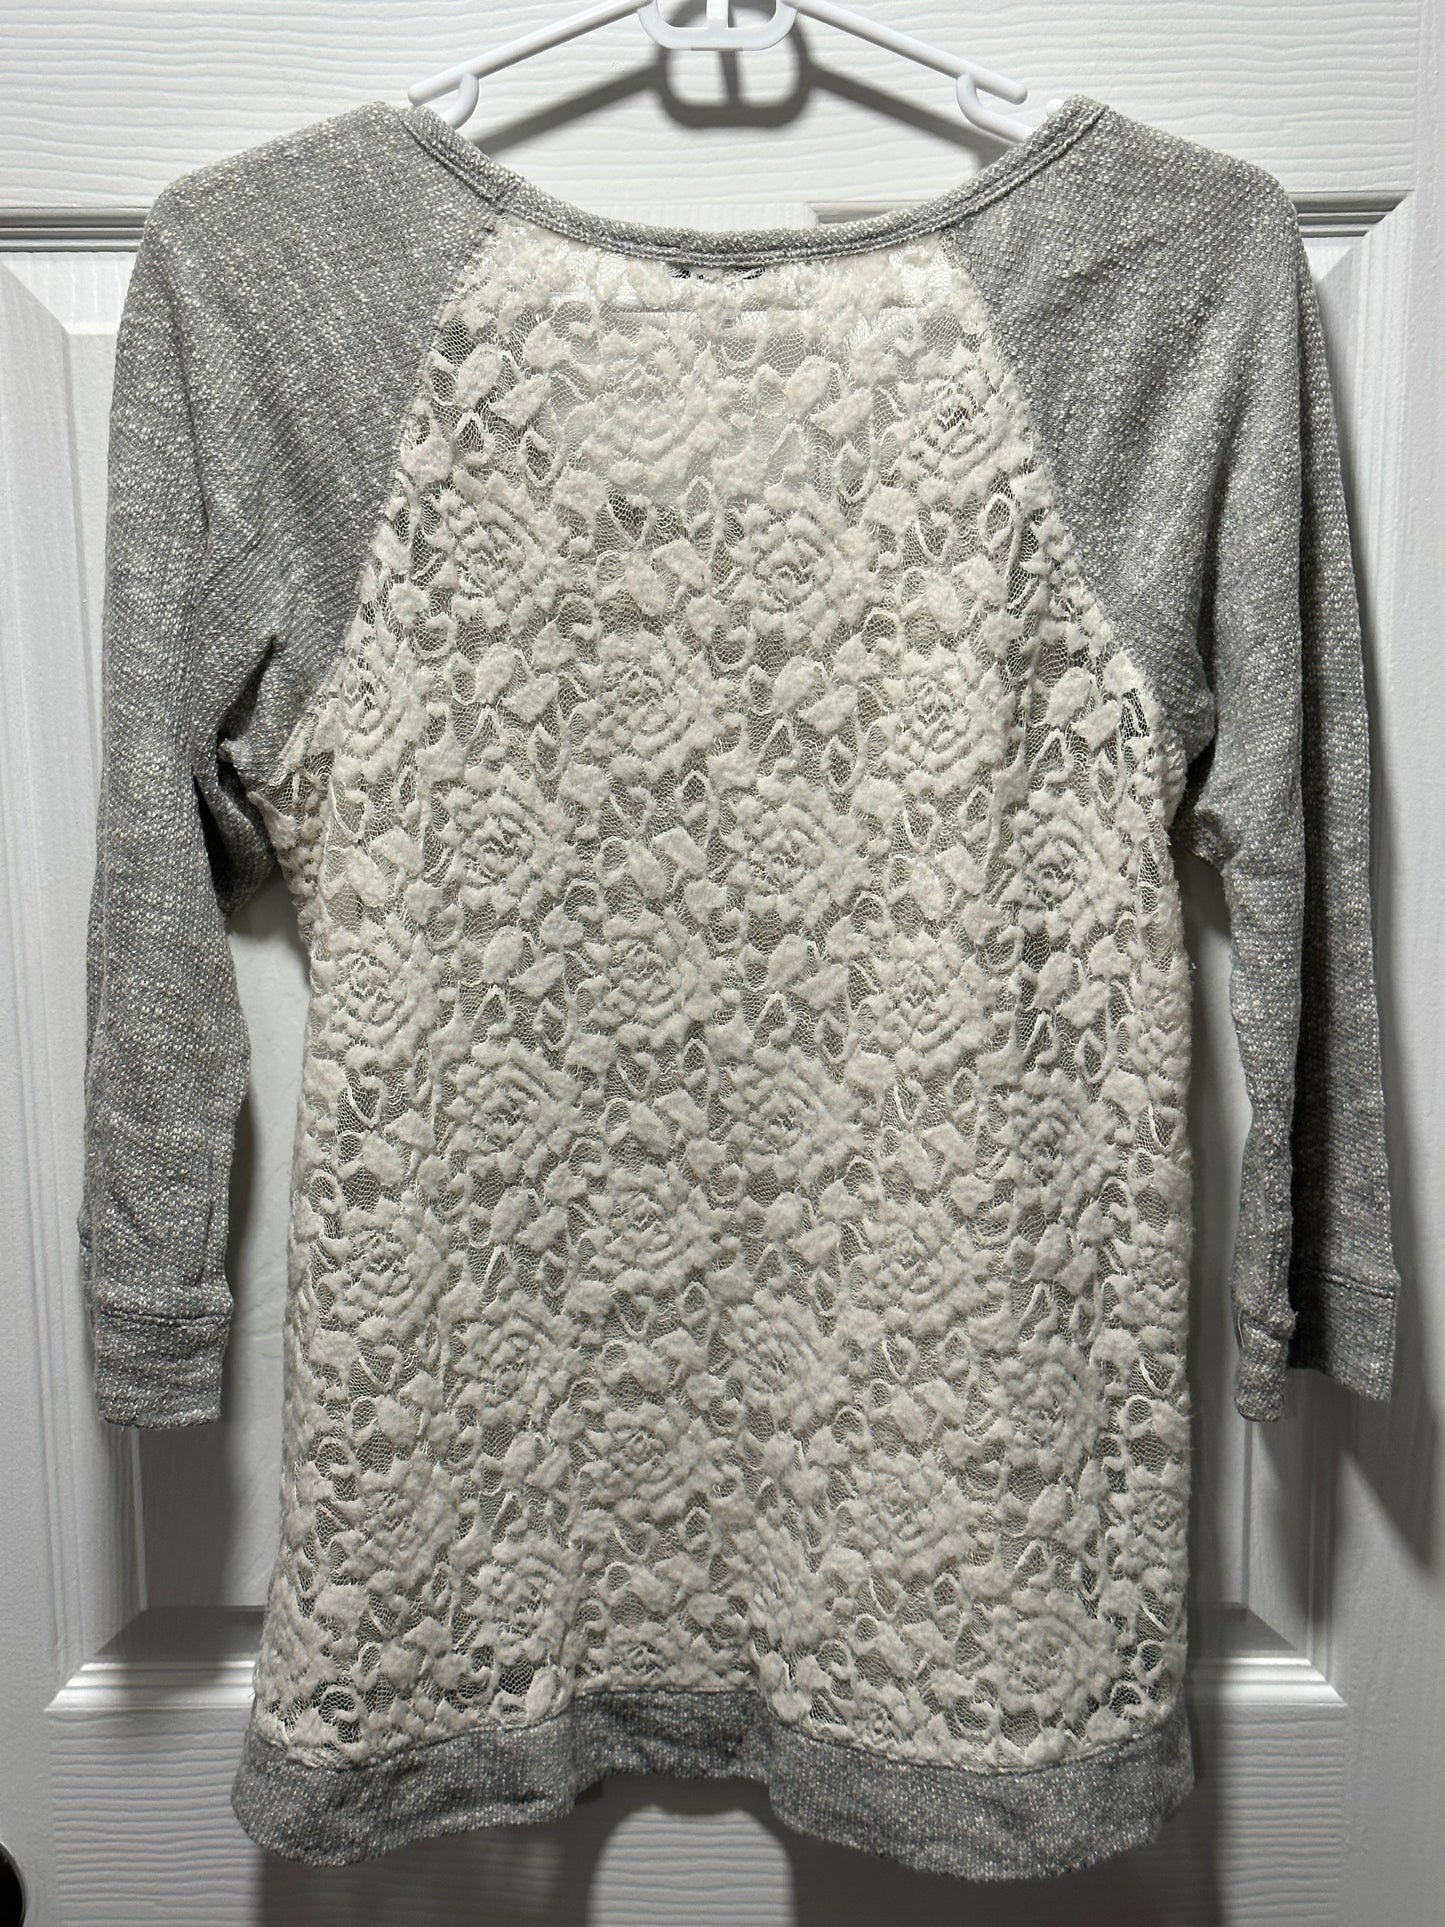 Express 3/4 Sleeve Gray Sweater with Lace Back - Women’s M - VGUC